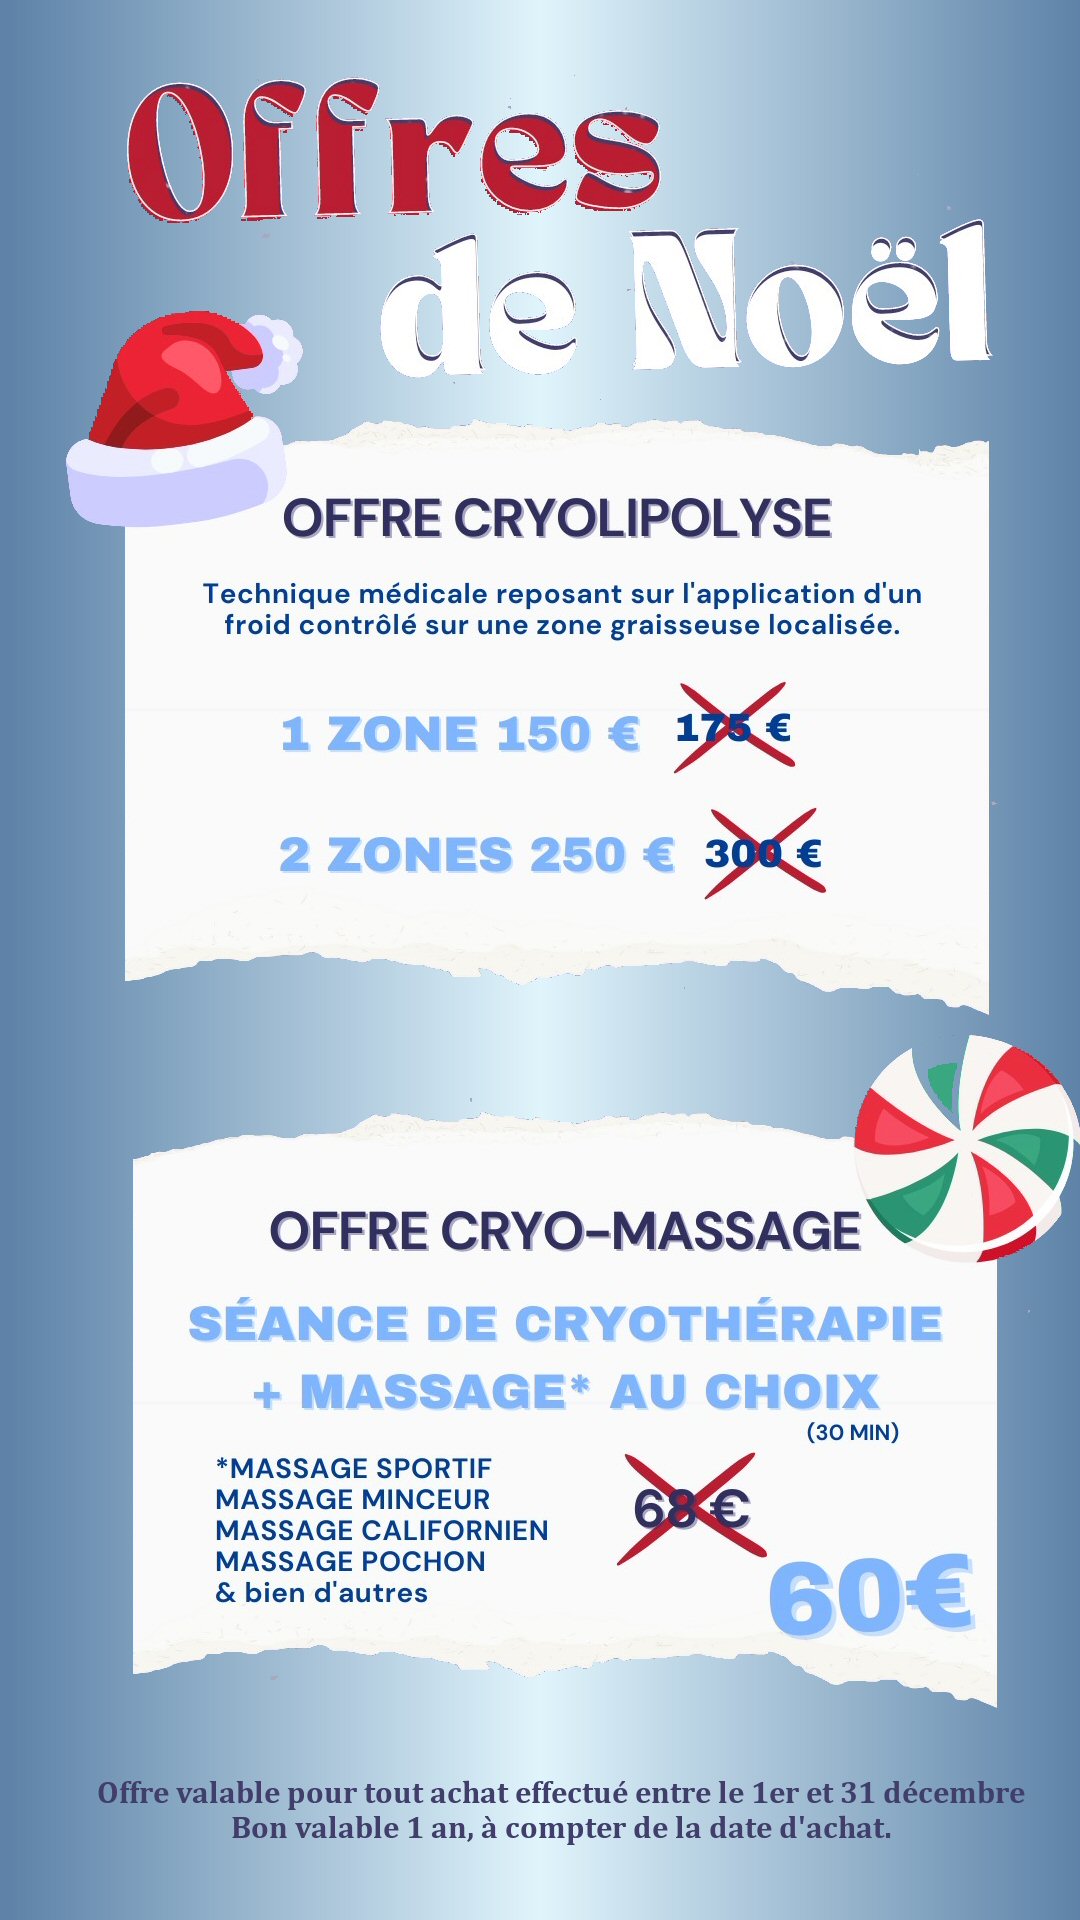 Offre cryolipolyse